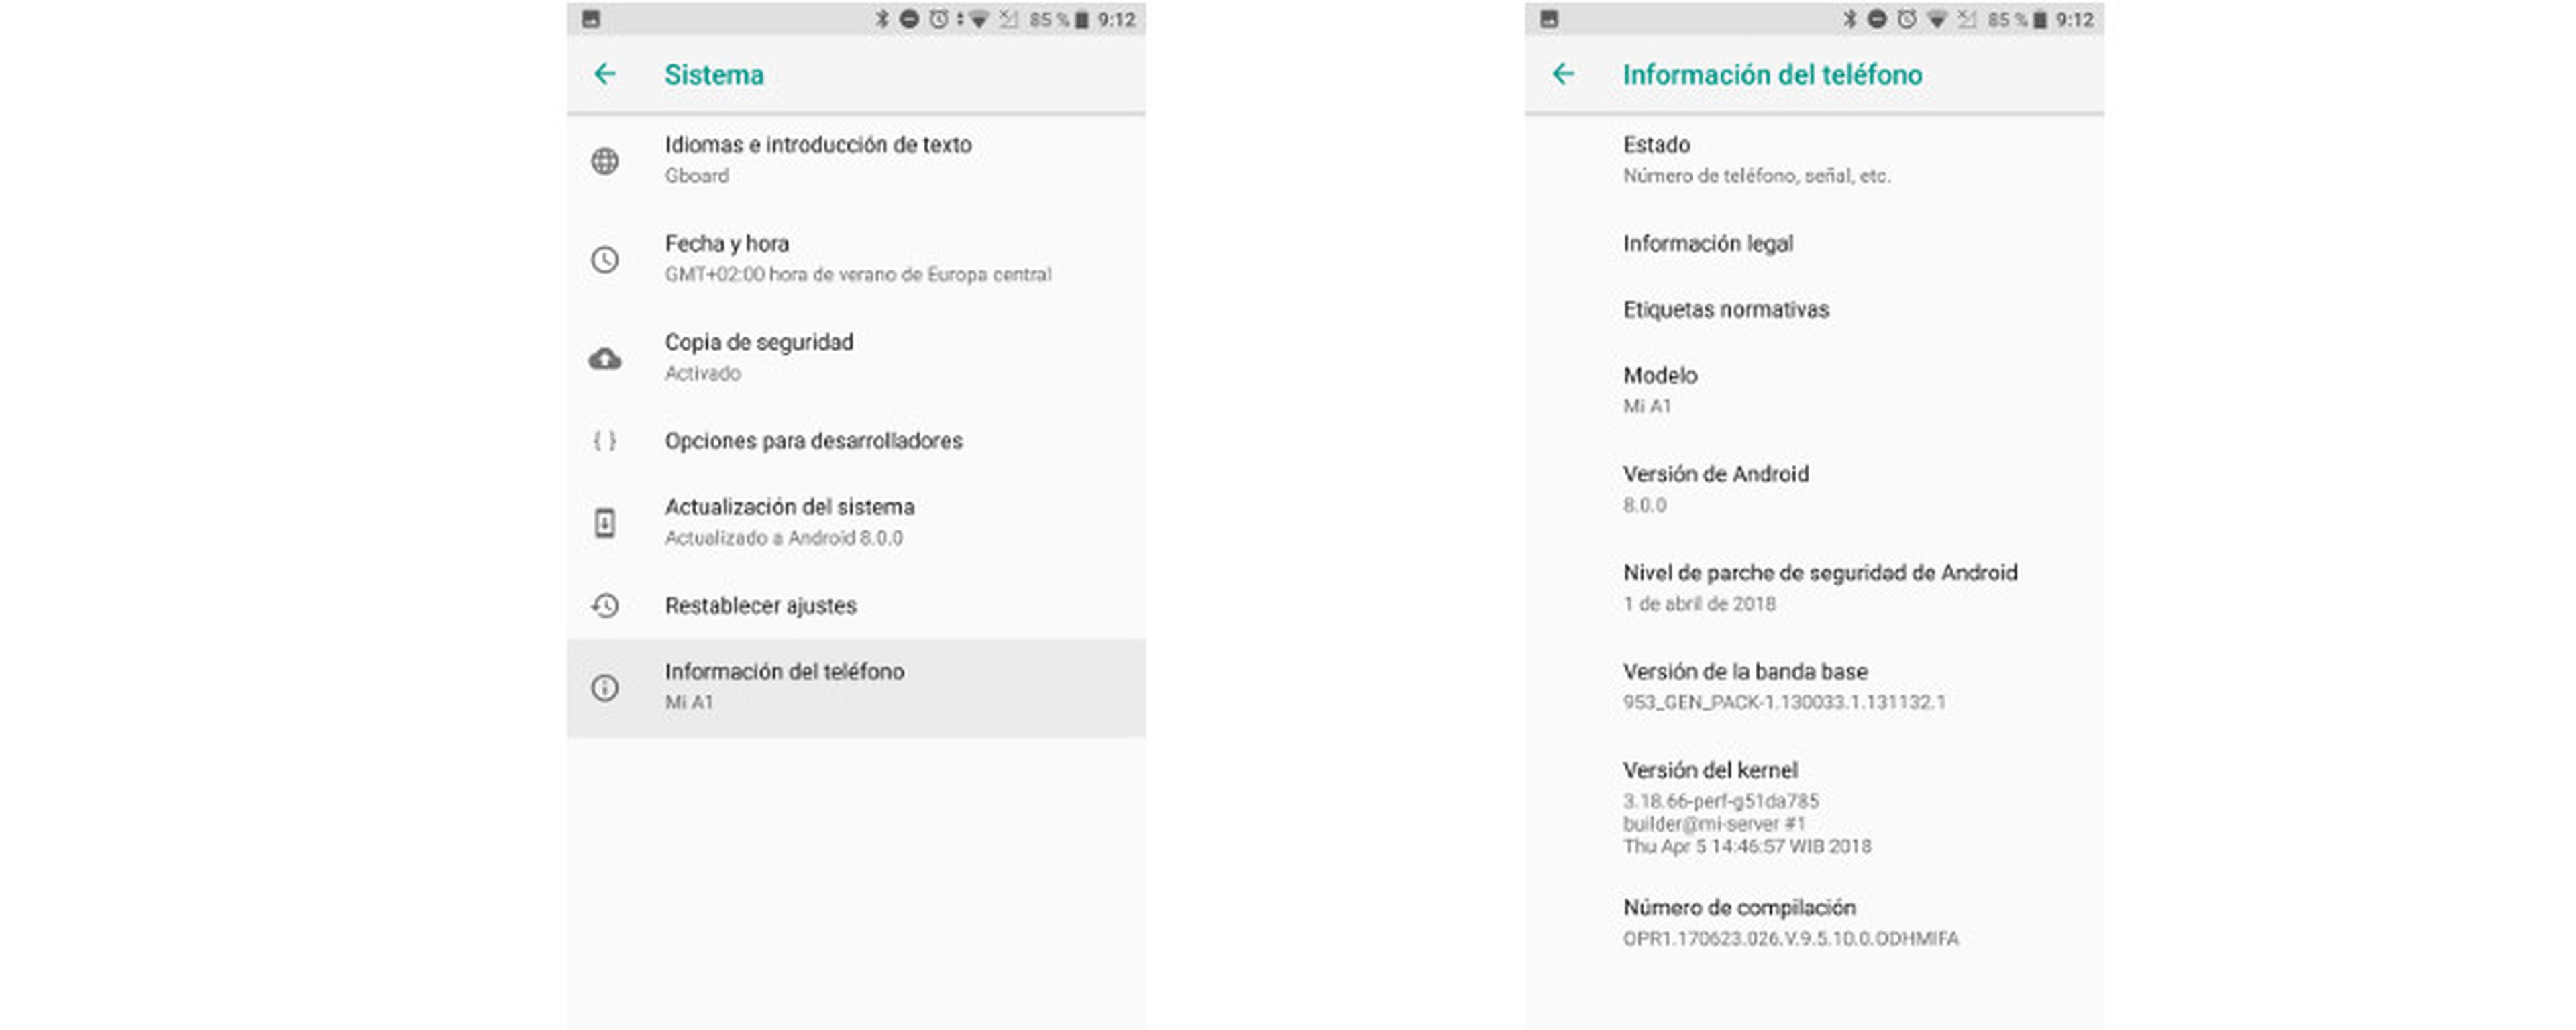 Mi A1: Version Android